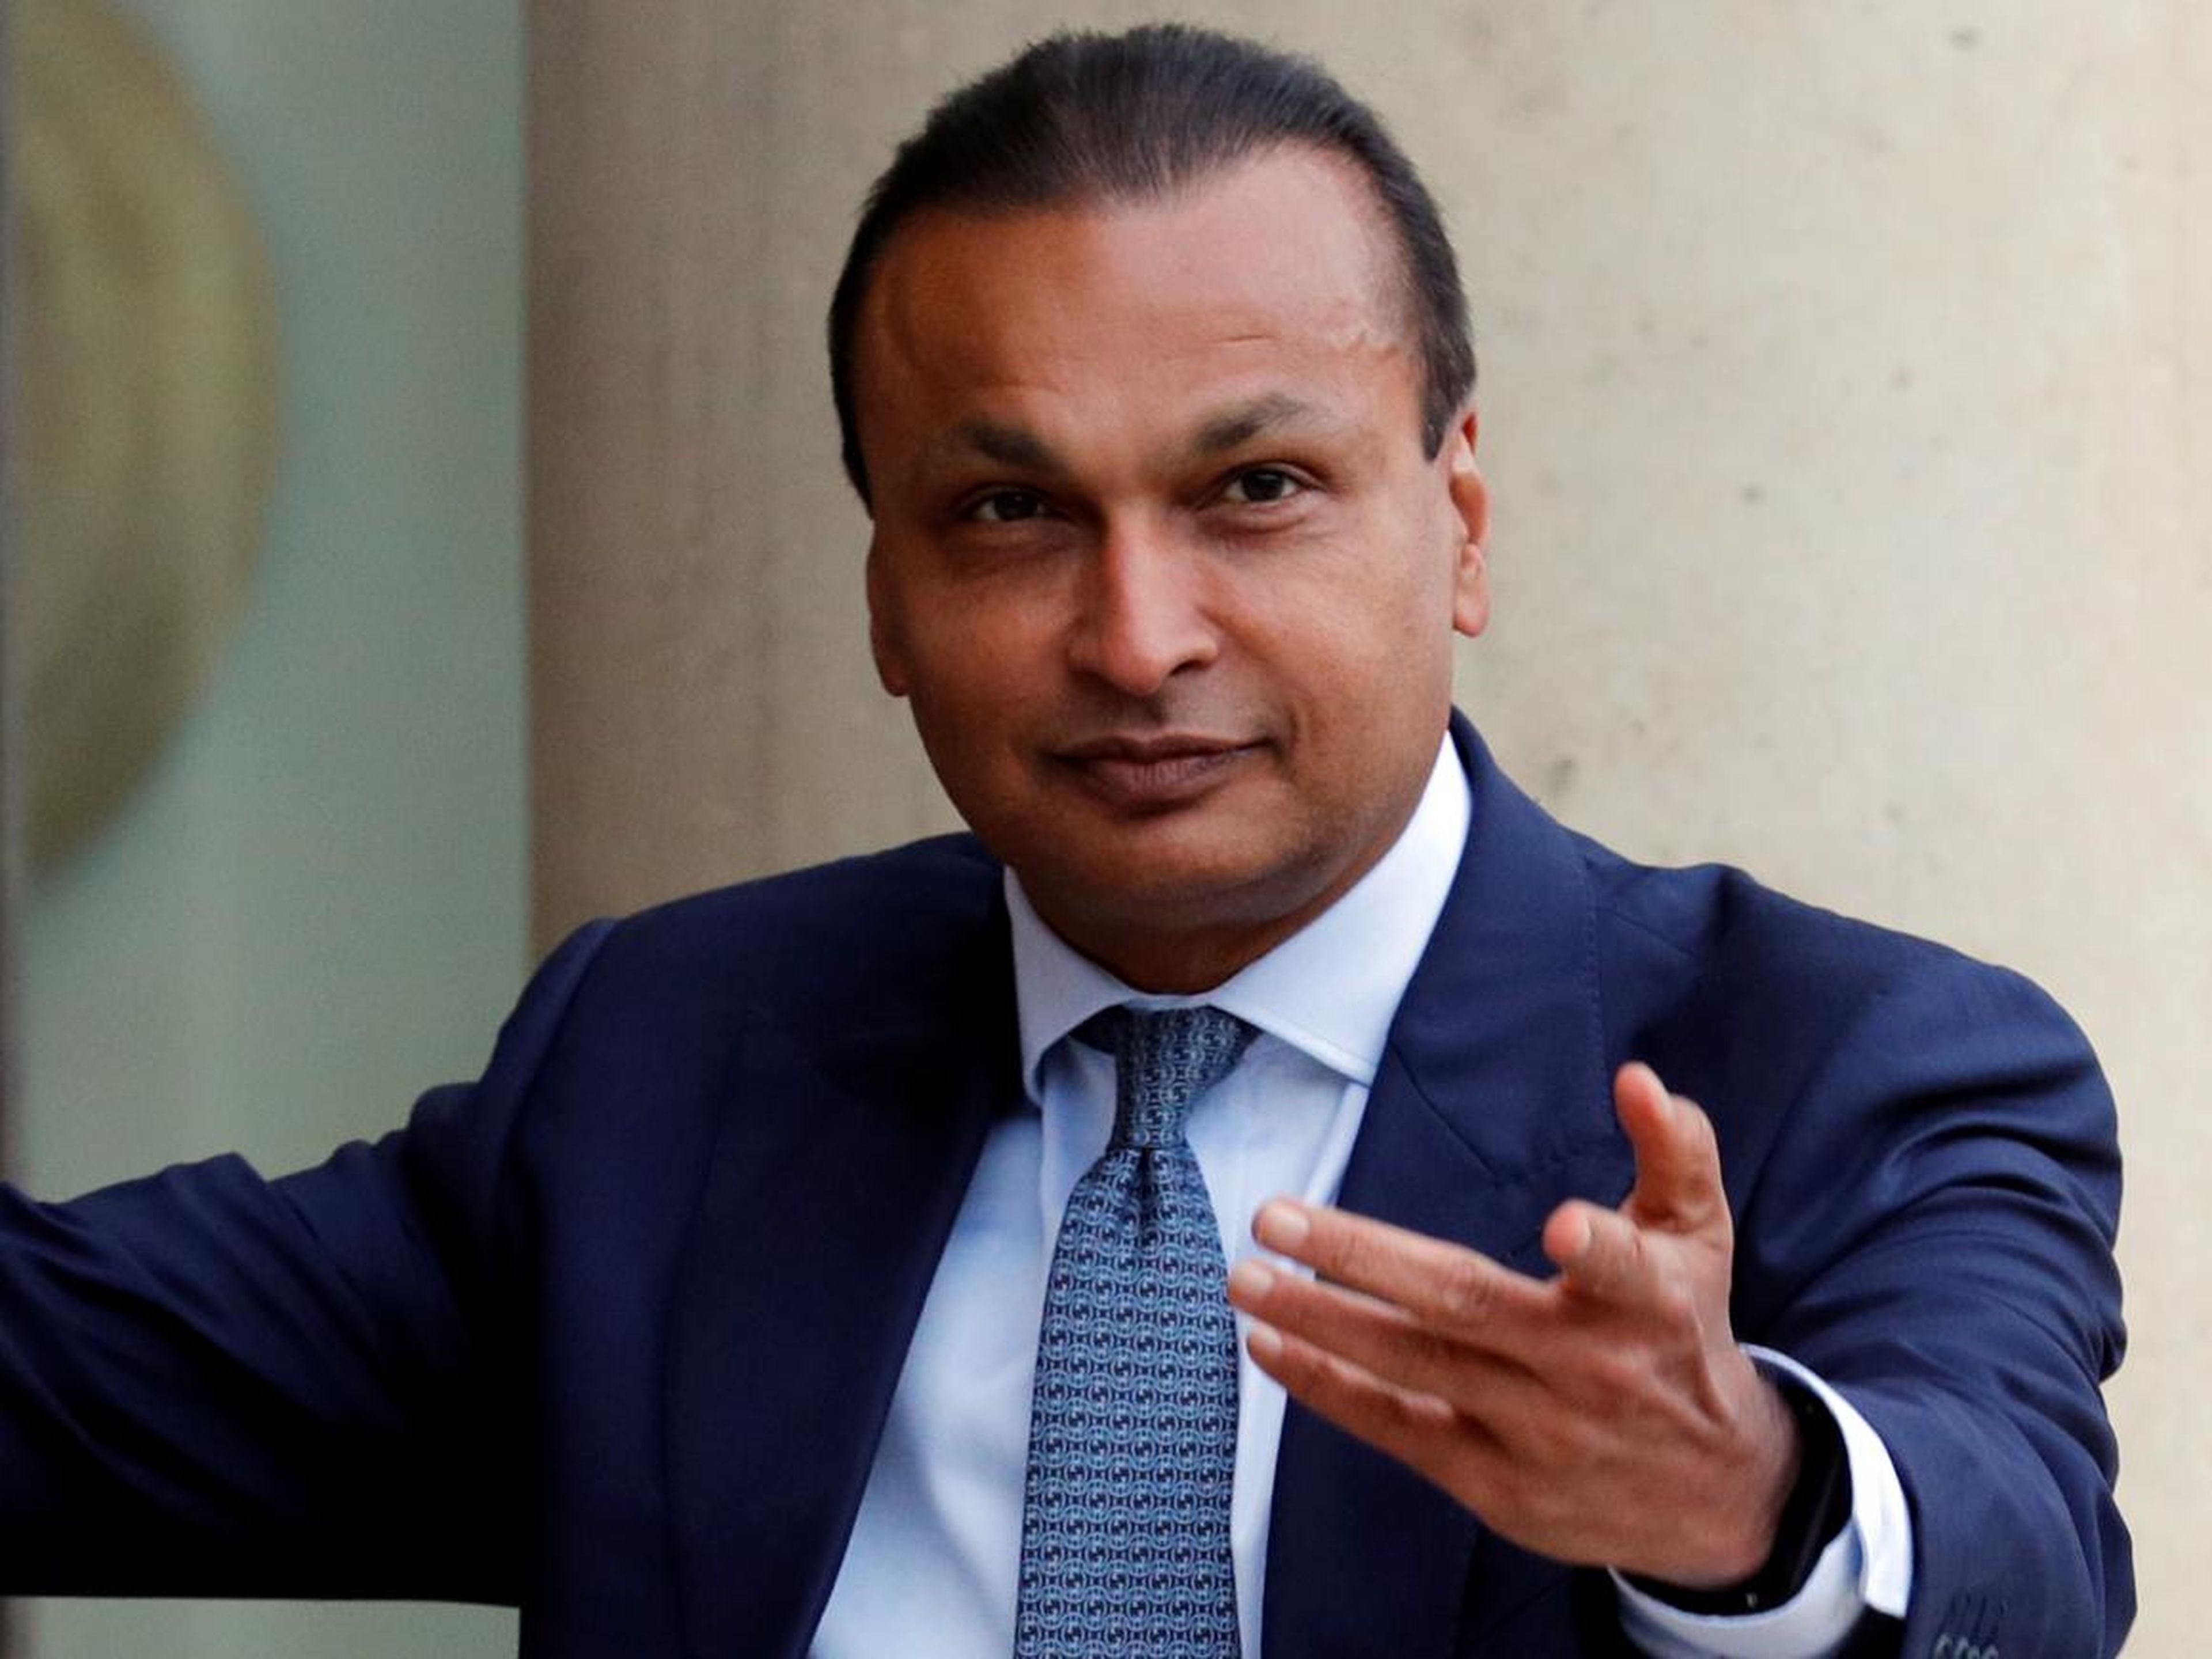 Anil Ambani, 60, chairman of Reliance Group, is worth an estimated $1.7 billion — less than 3% of his older brother's wealth. Bloomberg reported that 2018 saw Anil's businesses suffer from "legal and liquidity challenges."